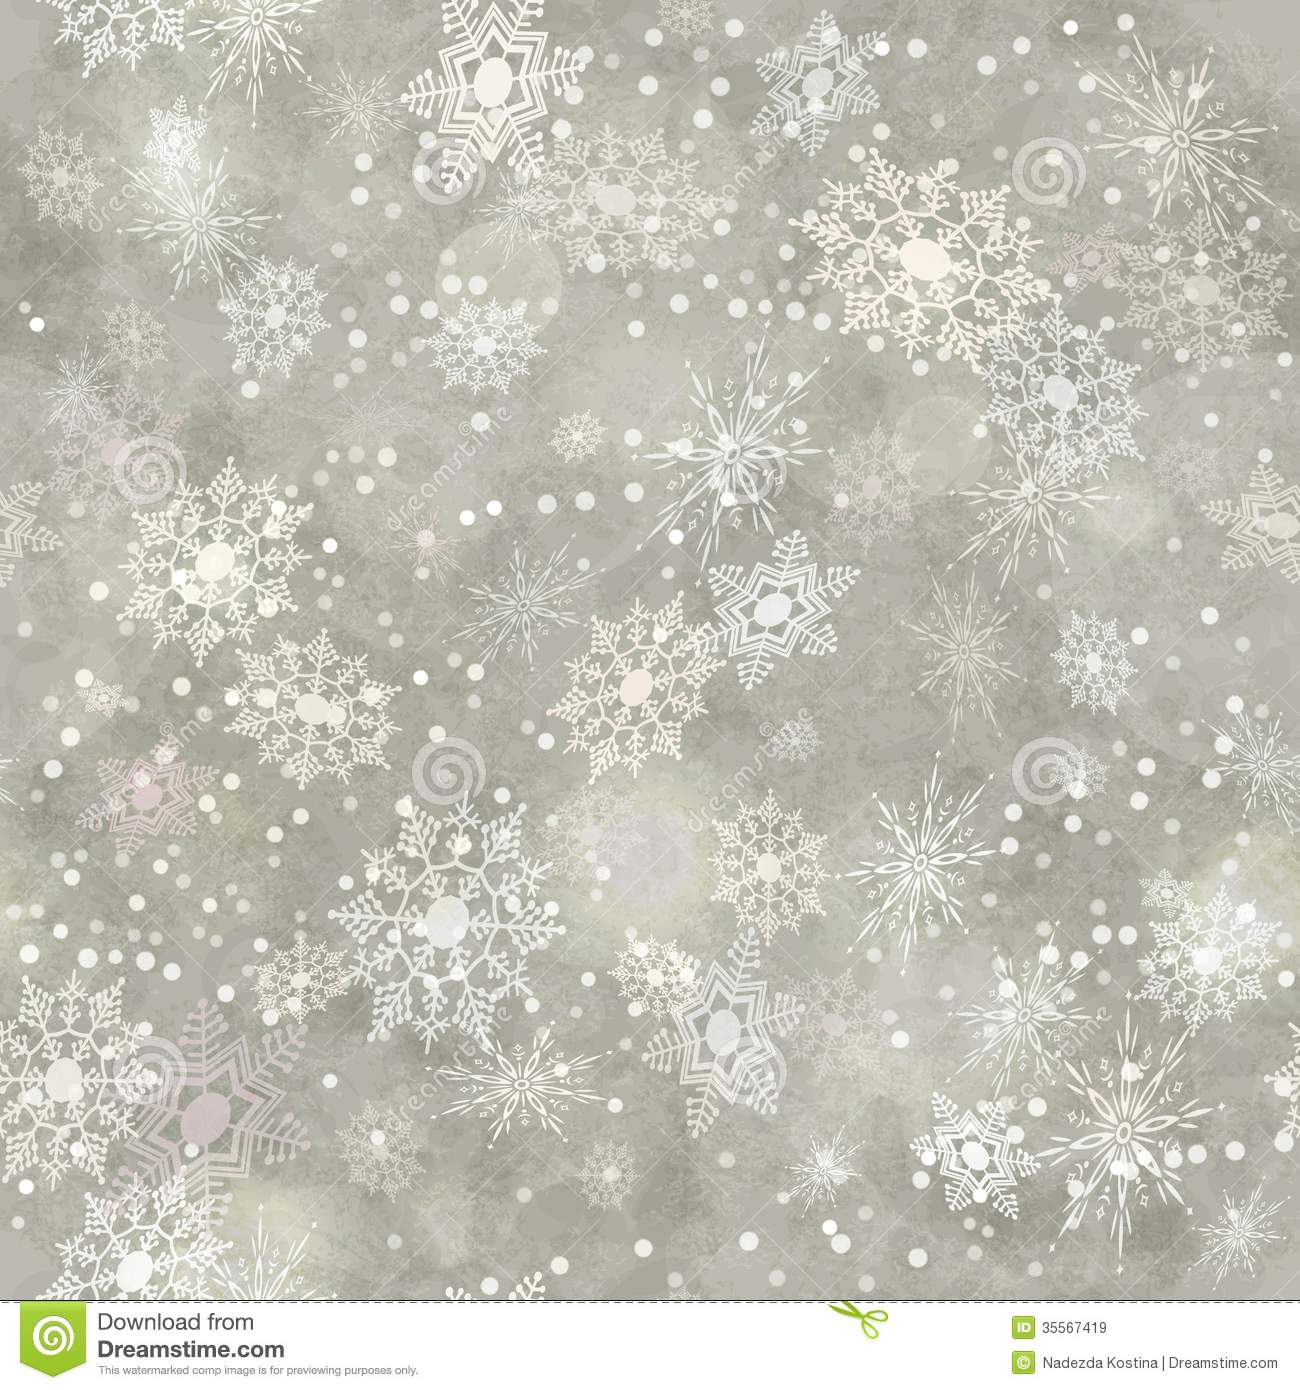 Wrapping Vintage Paper Snowflake Seamless Pattern Royalty